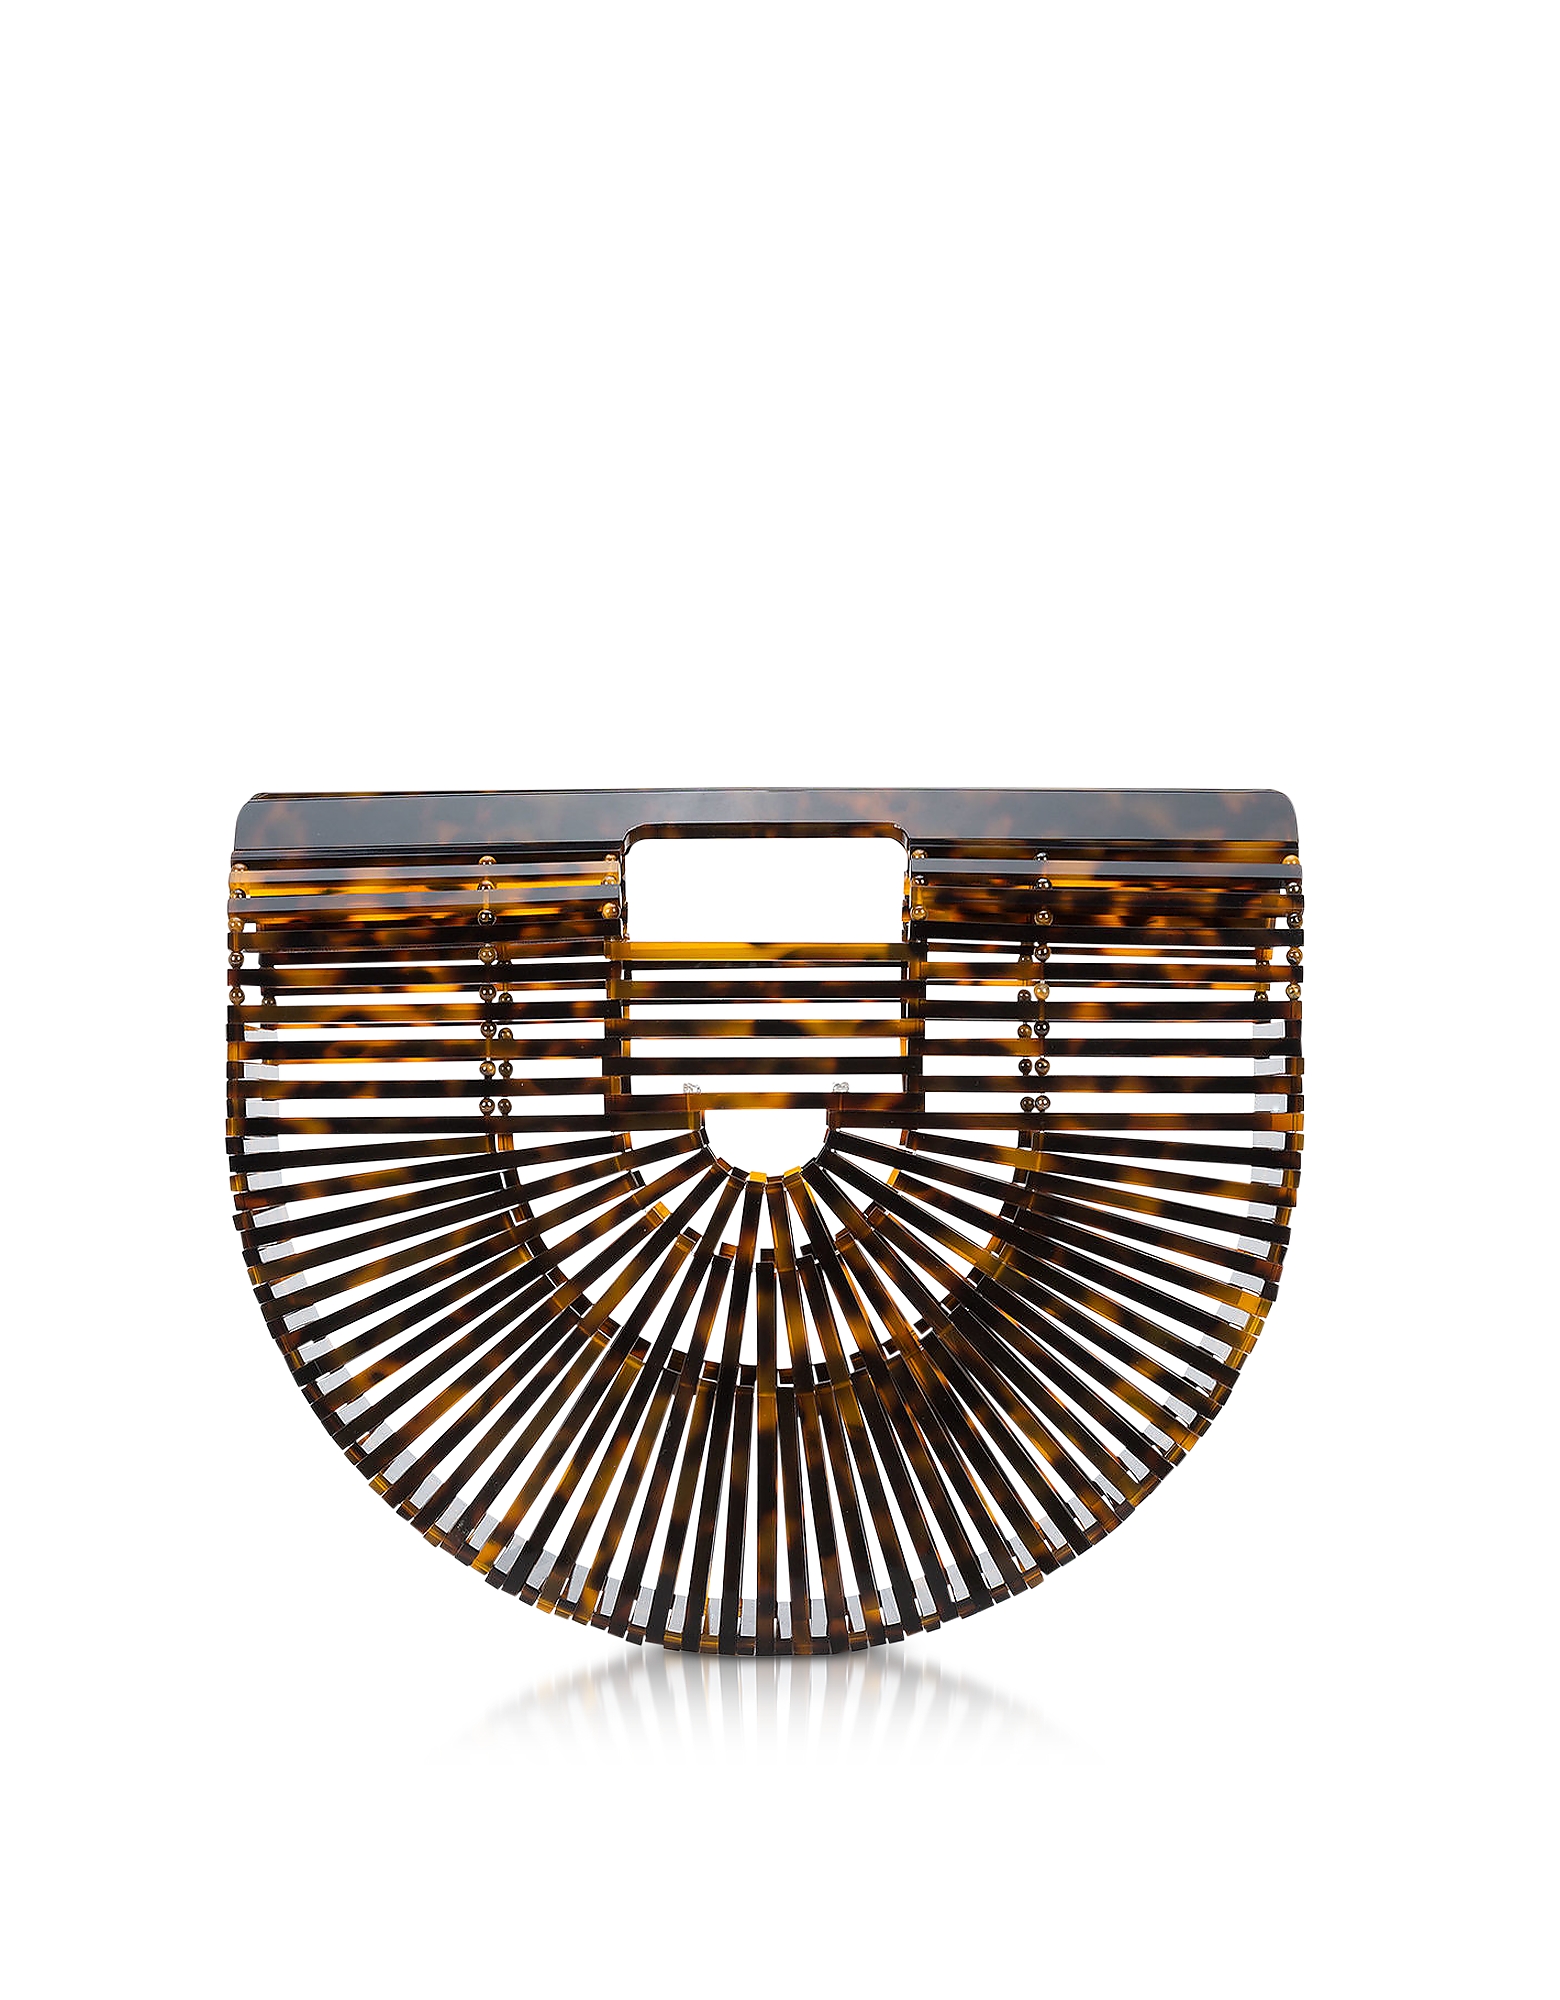 Cult Gaia - Tortoise Acrylic Small Ark Bag | ABOUT ICONS